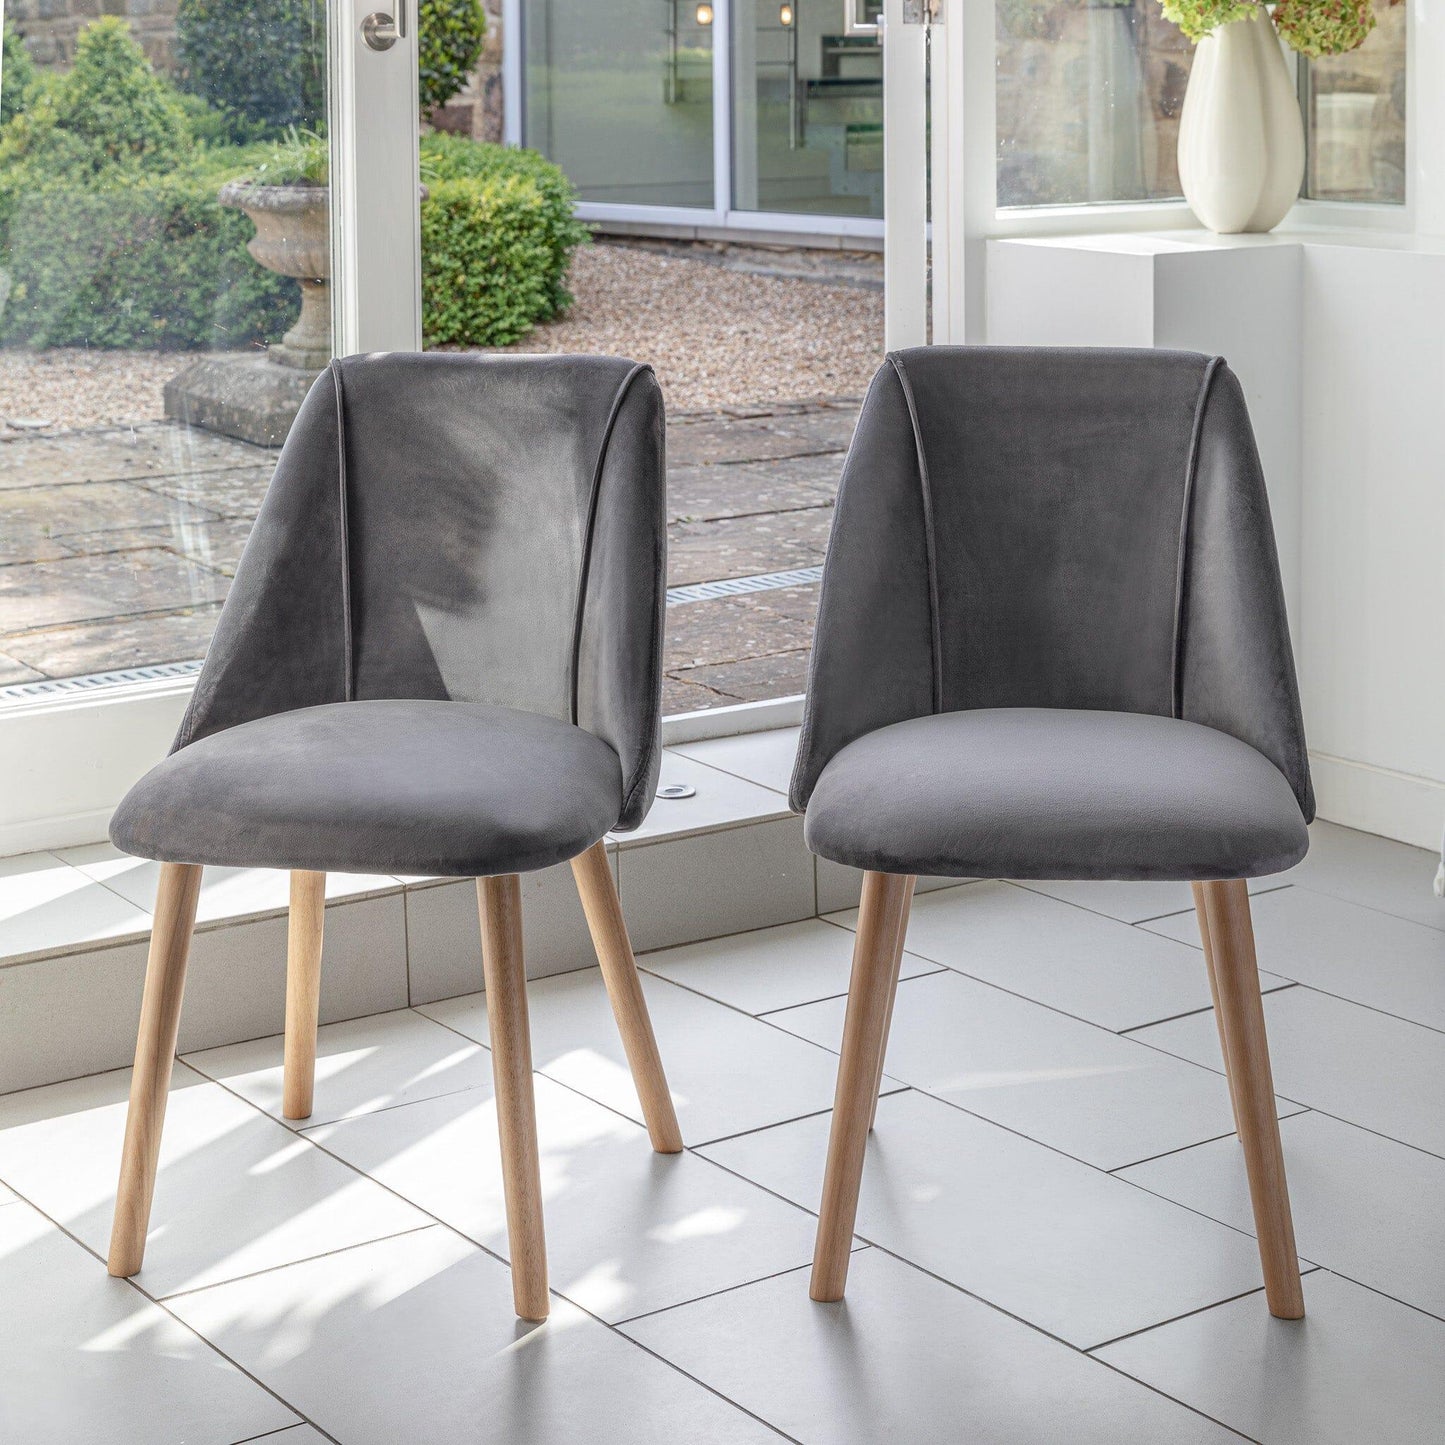 Willow 4 Seater Pale Oak Dining Table Set - Freya Grey Dining Chairs with Pale Oak Legs - Laura James